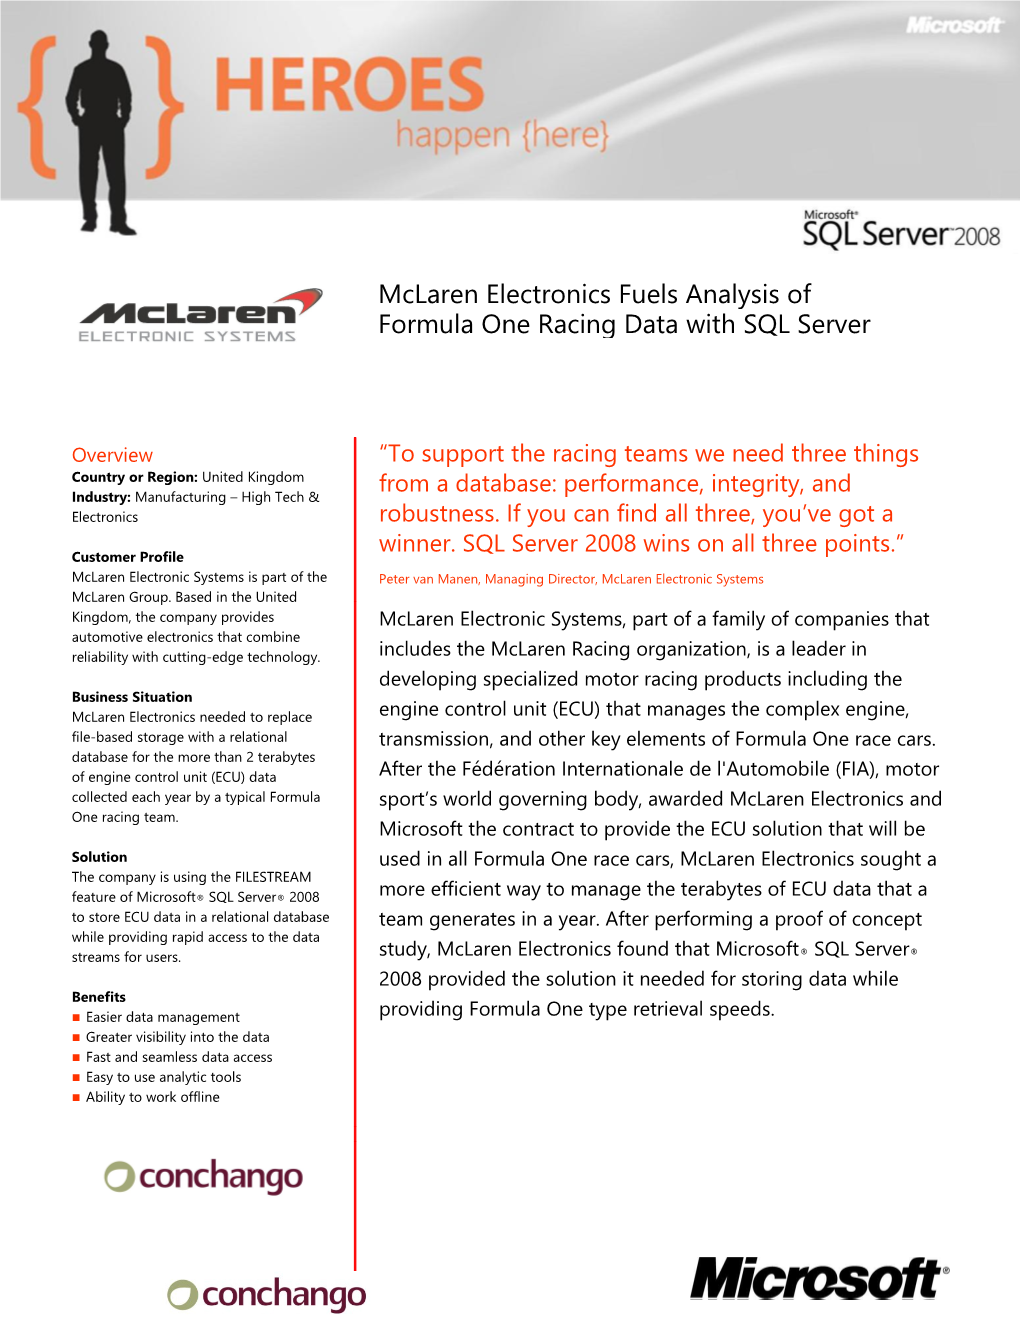 Mclaren Electronic Systemes - SQL Server 2008 Case Study